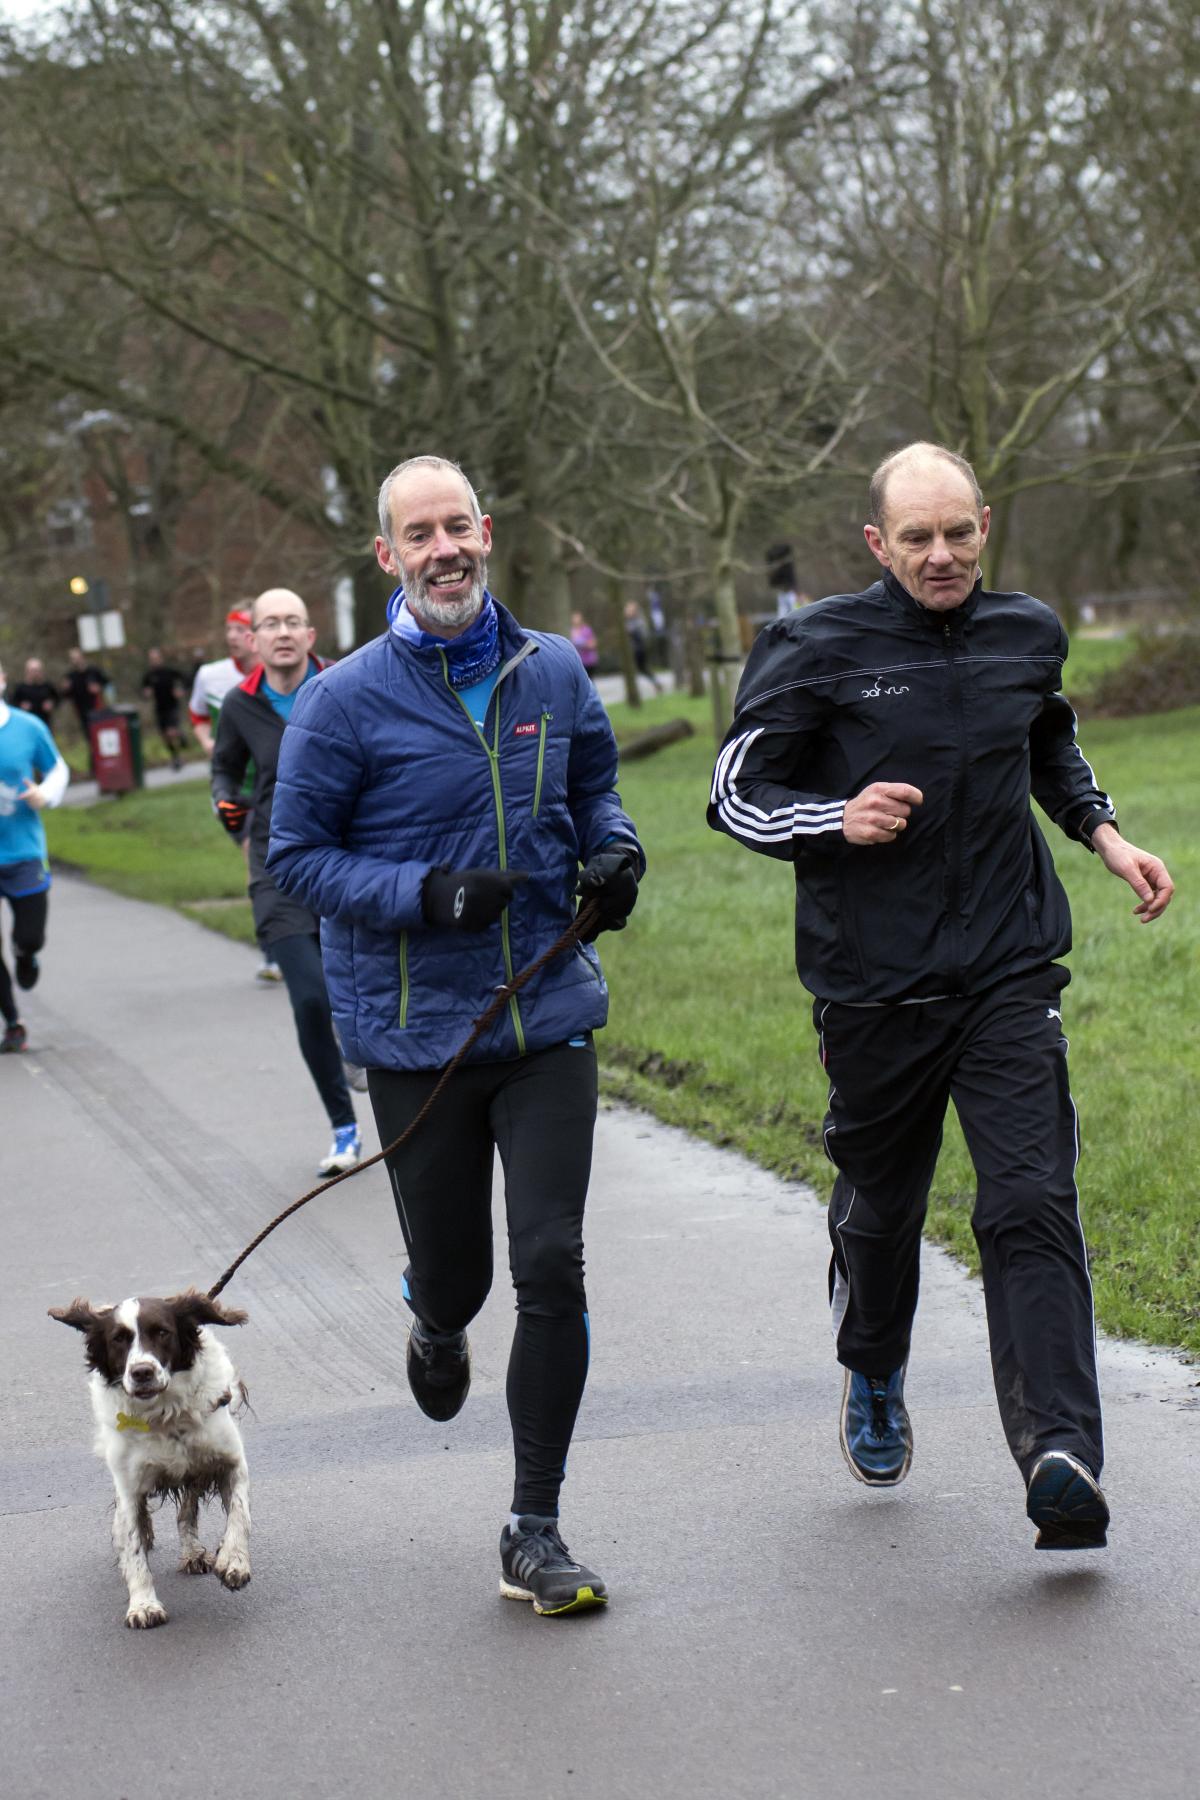 Paul Sinton-Hewitt (founder) running with his dog Dotty.